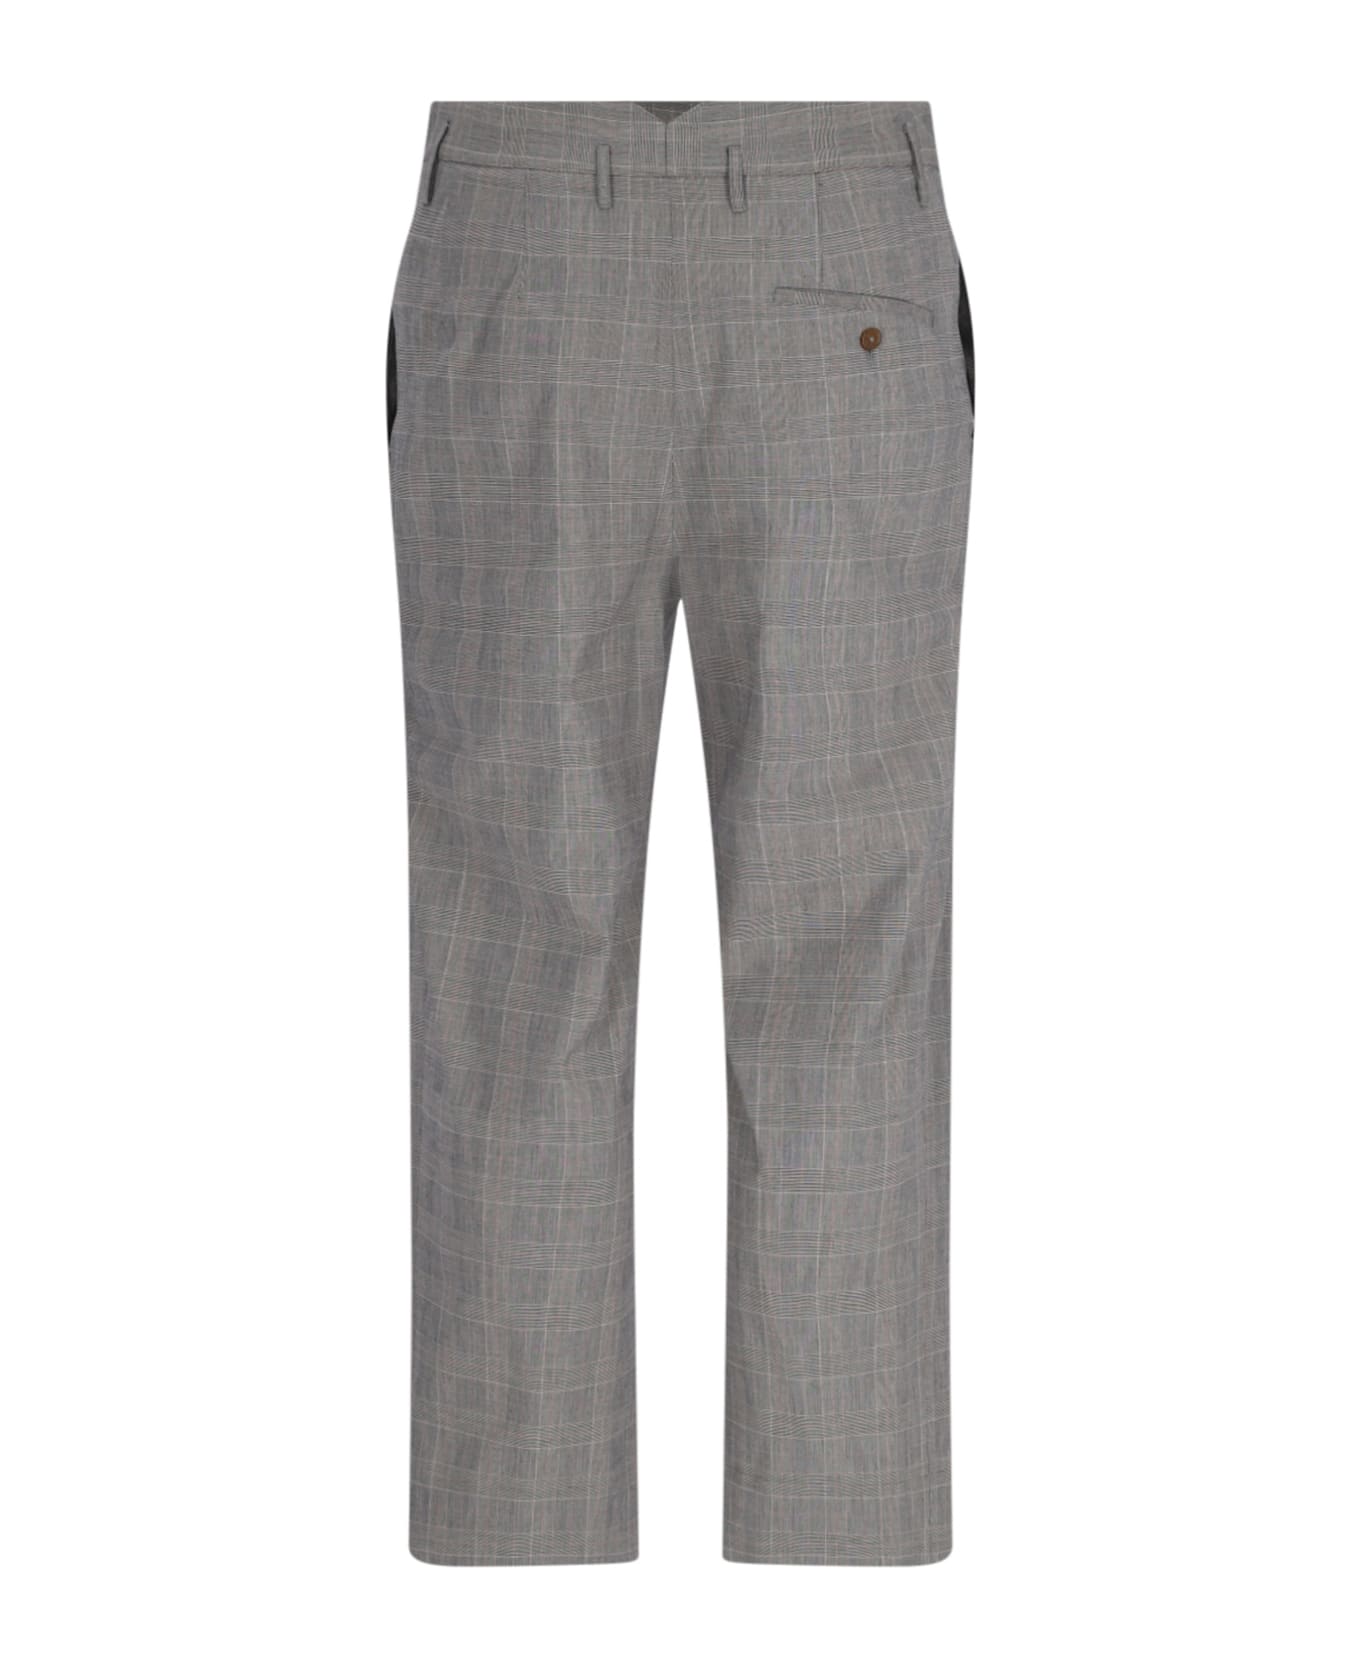 Vivienne Westwood Cropped Trousers - Gray